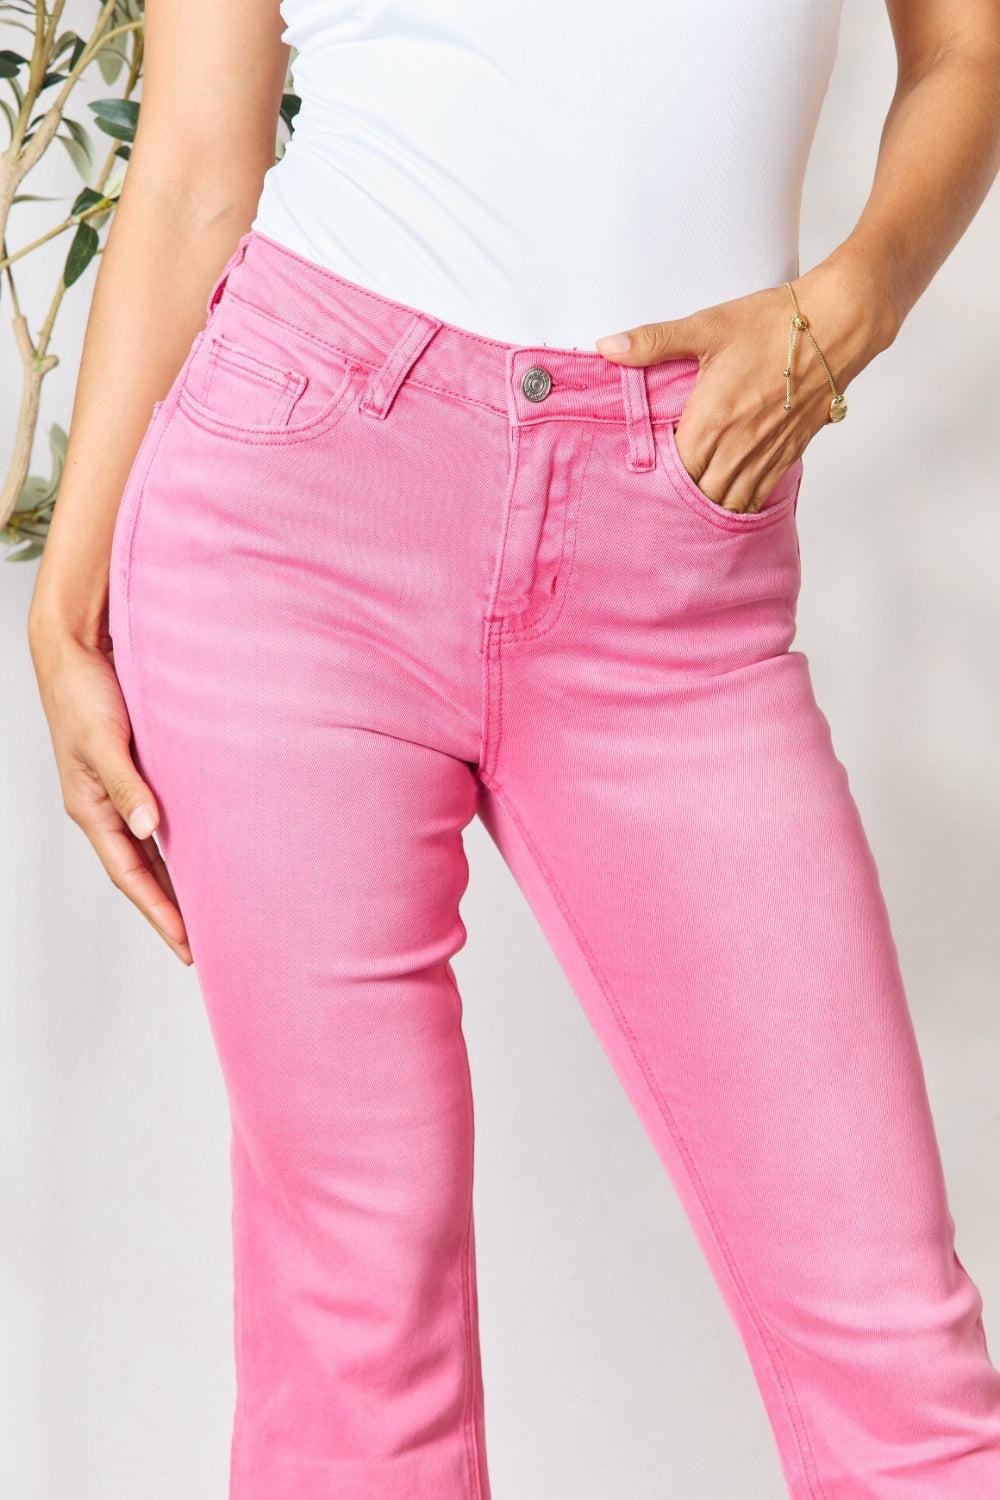 a woman in a white tank top and pink jeans